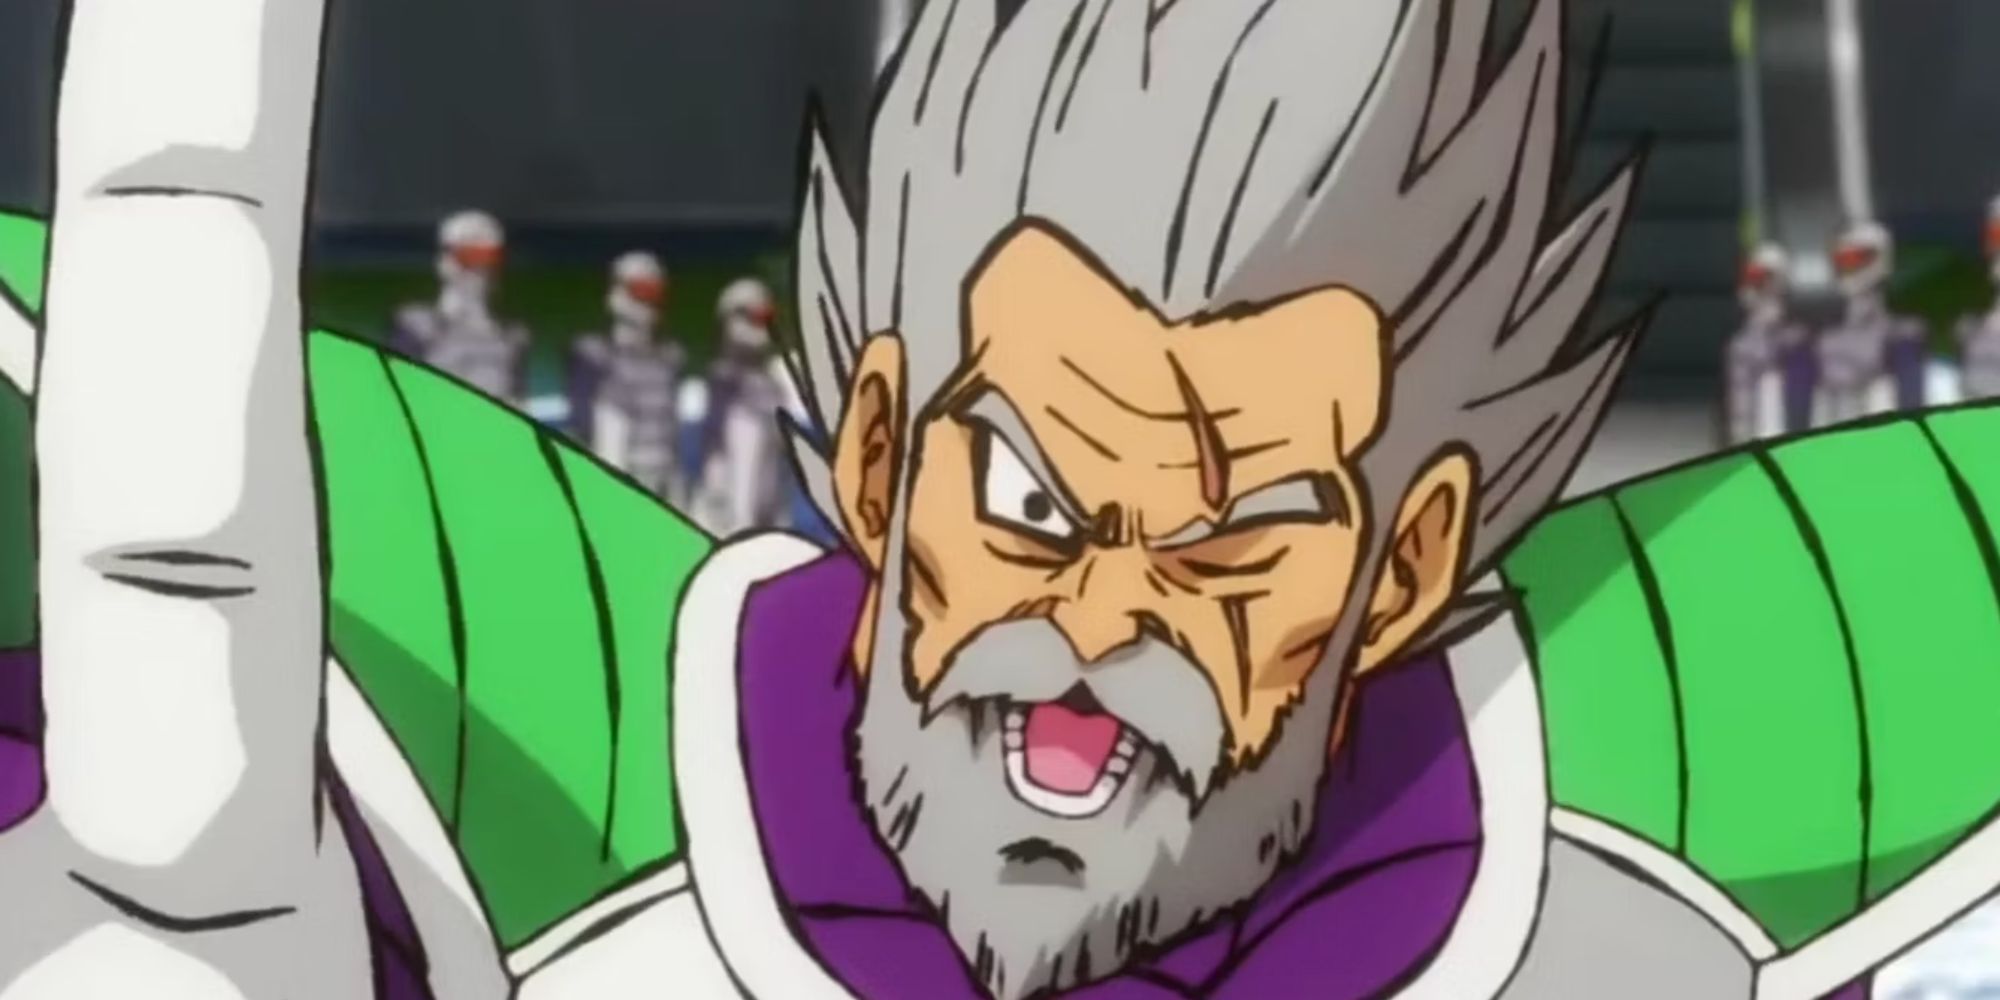 Paragus, Broly's father